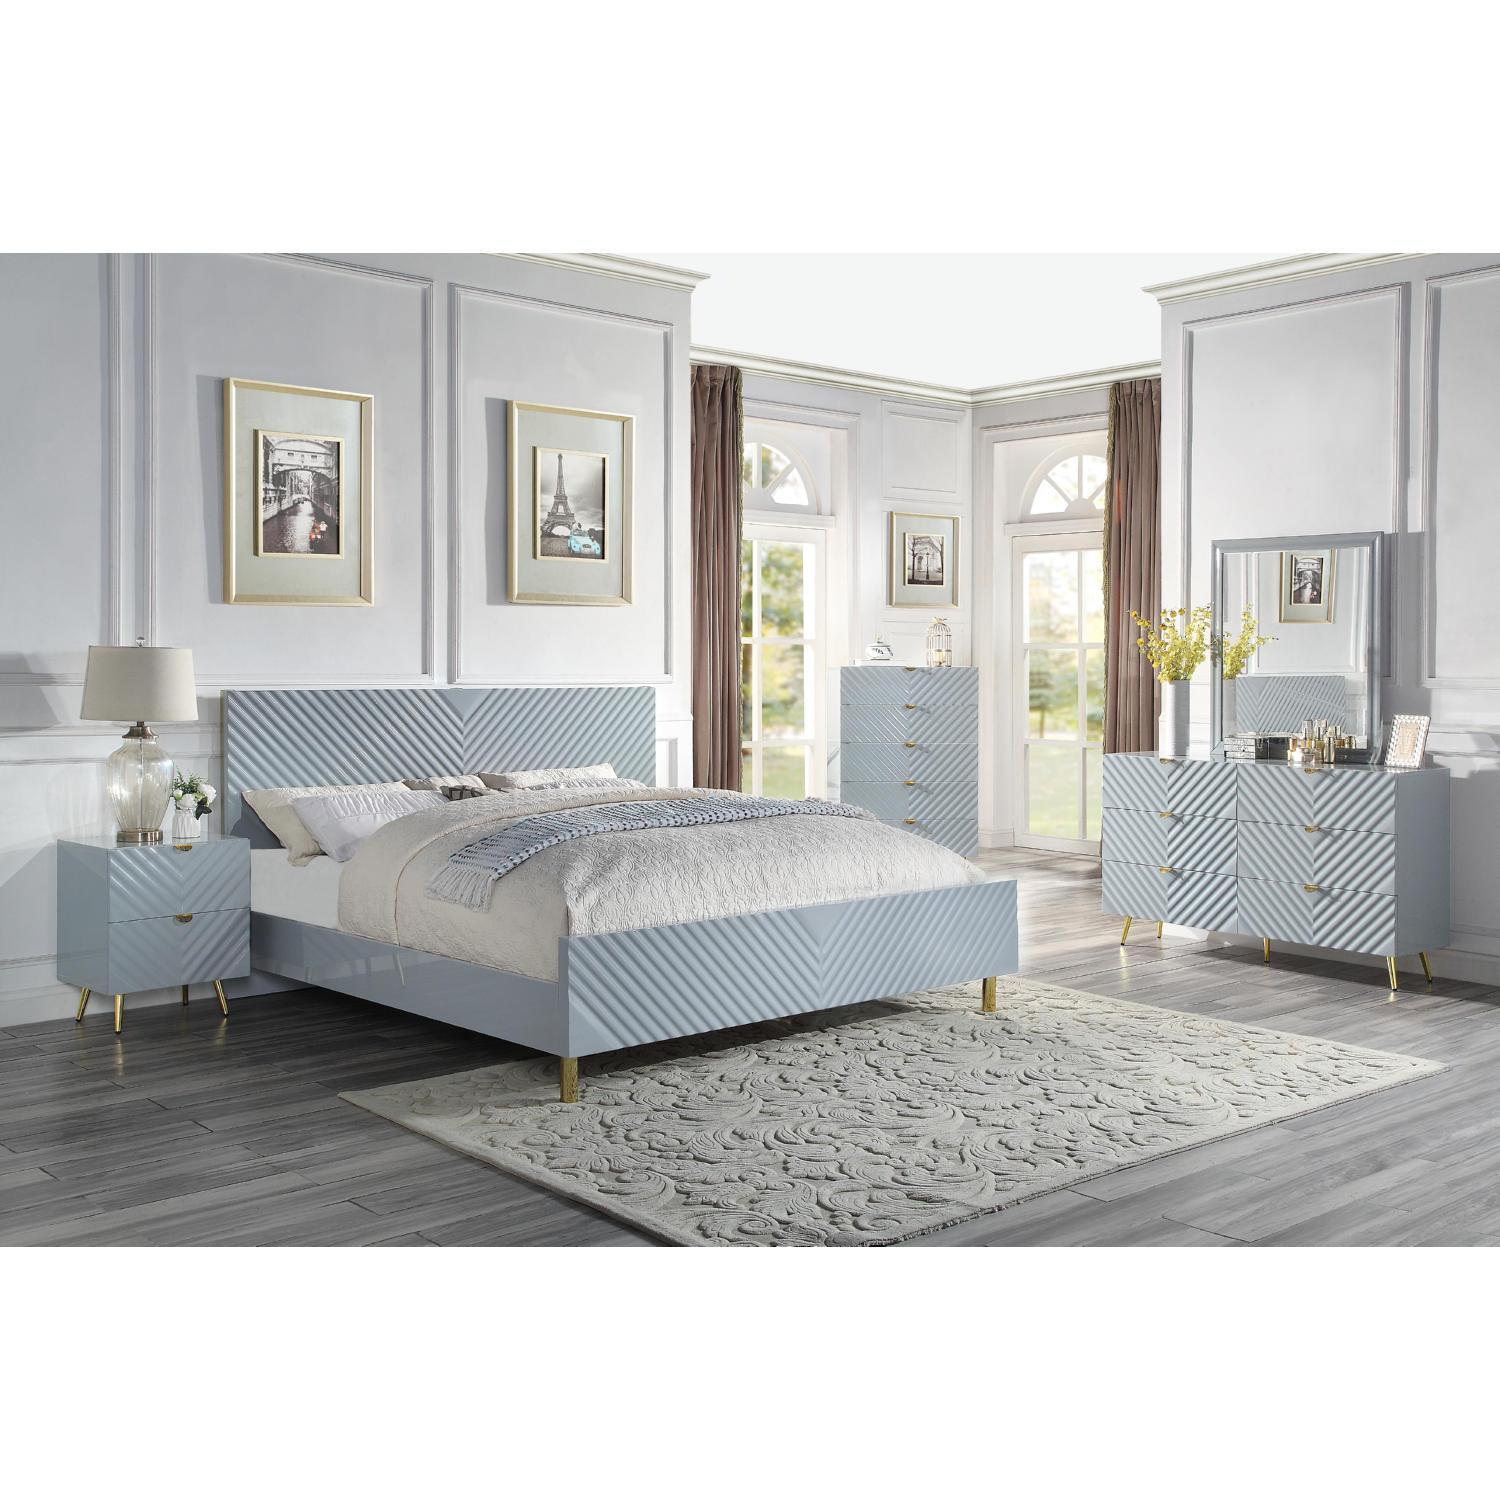 Modern, Casual Bedroom Set Gaines BD01040Q-6pcs in Gray 